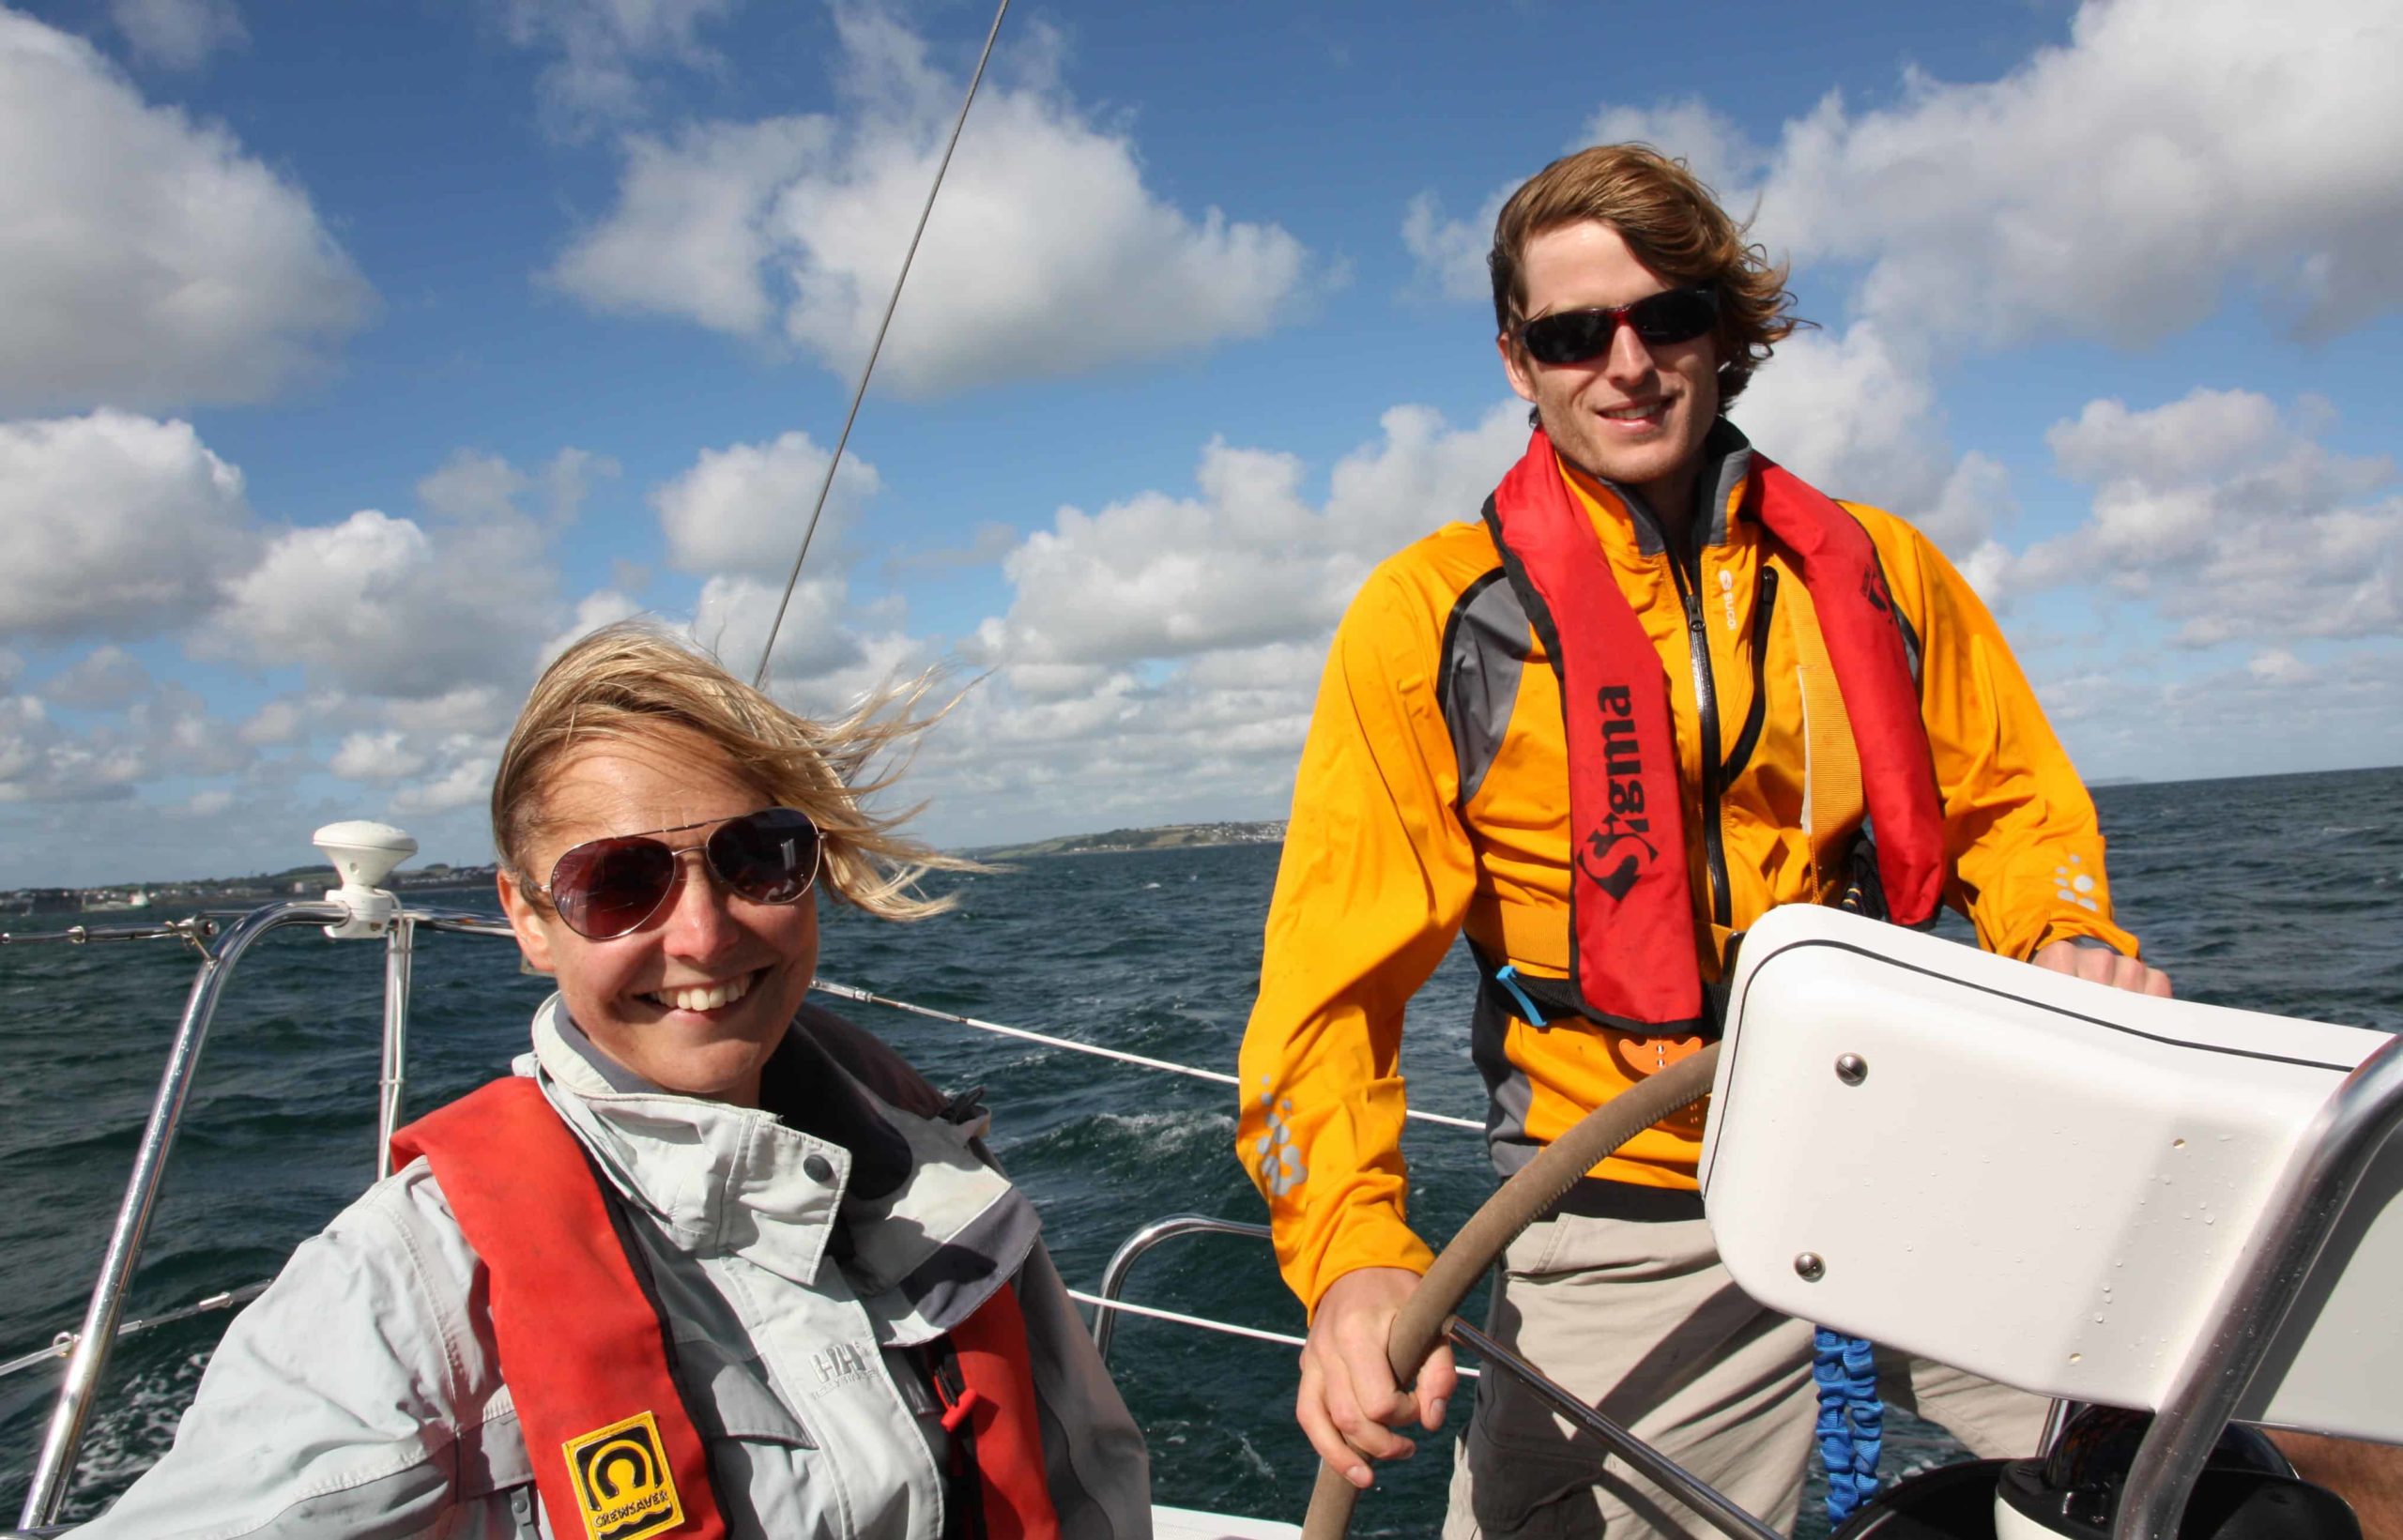 Yacht delivery crew smiling as they sail along the cornish coast